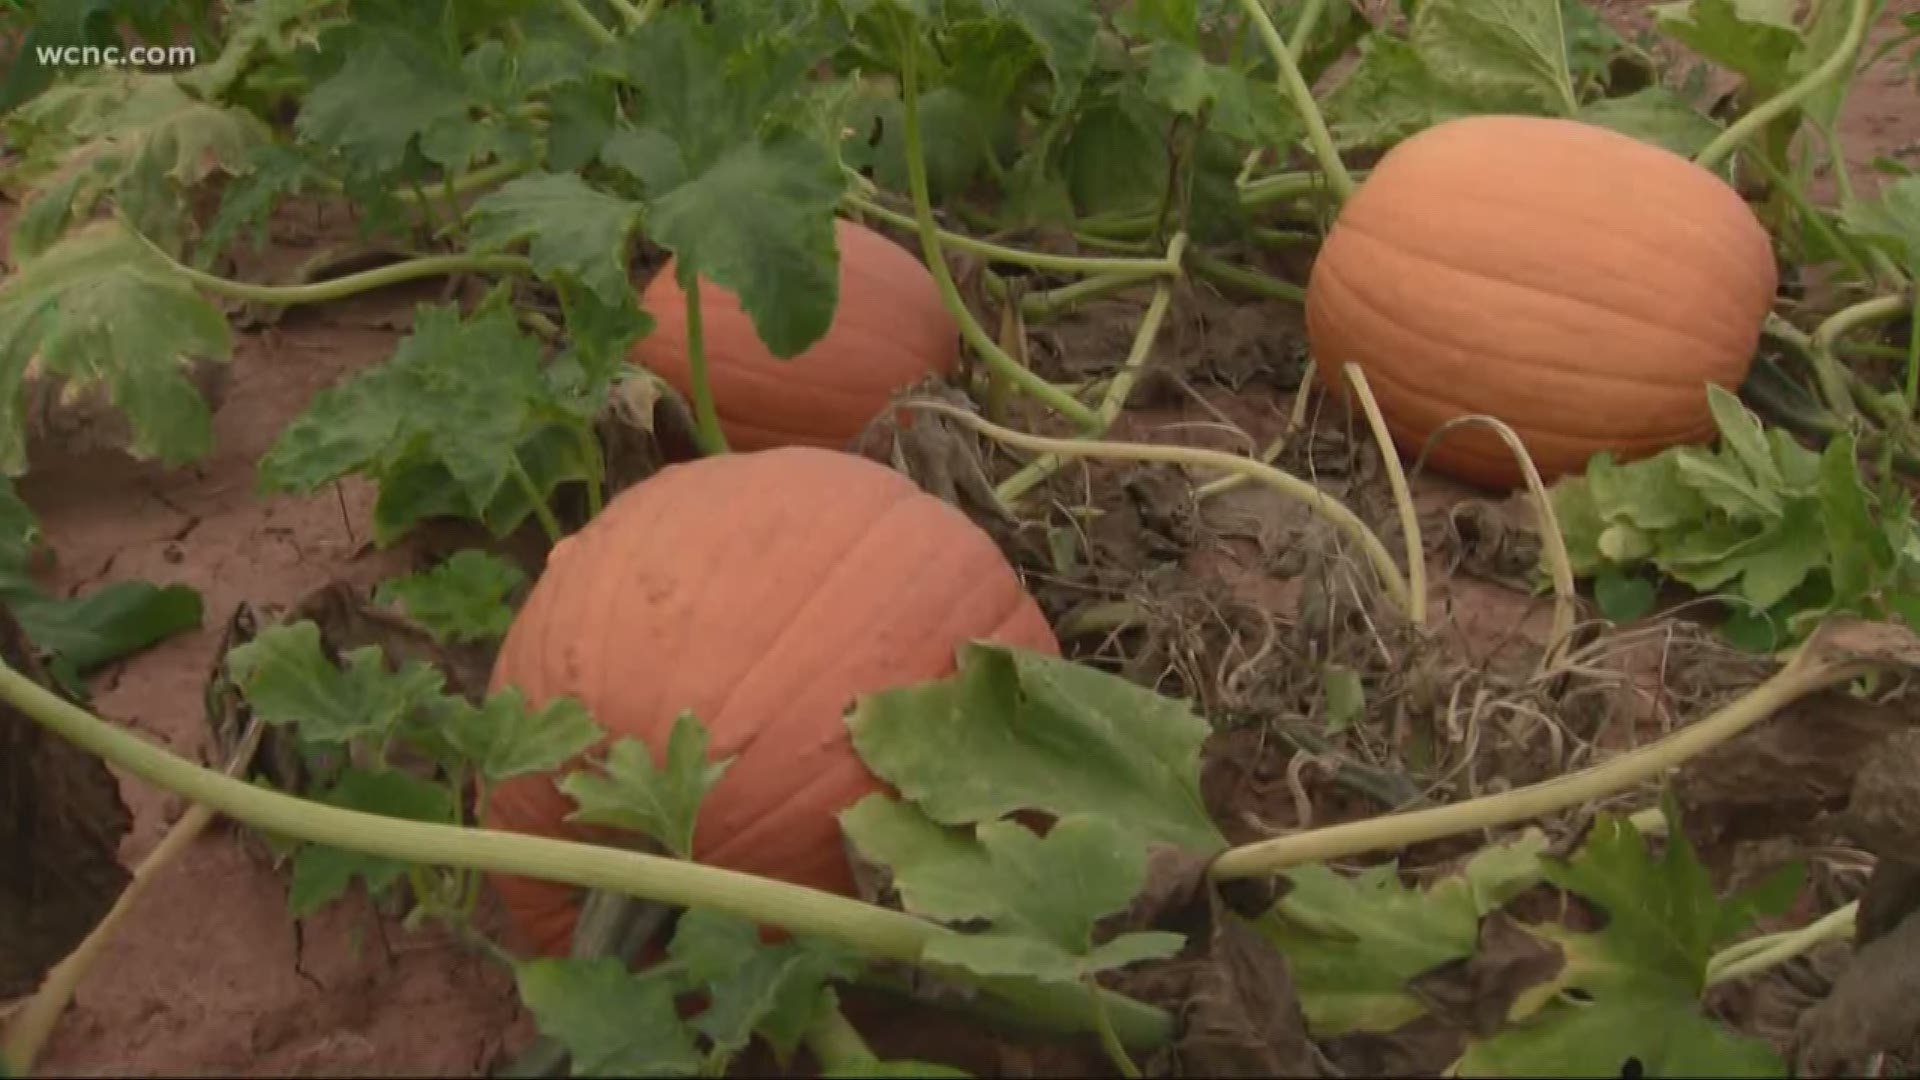 When it comes to prime apple development, the key factor is a cold winter. Meanwhile, dry weather can be good for pumpkins.